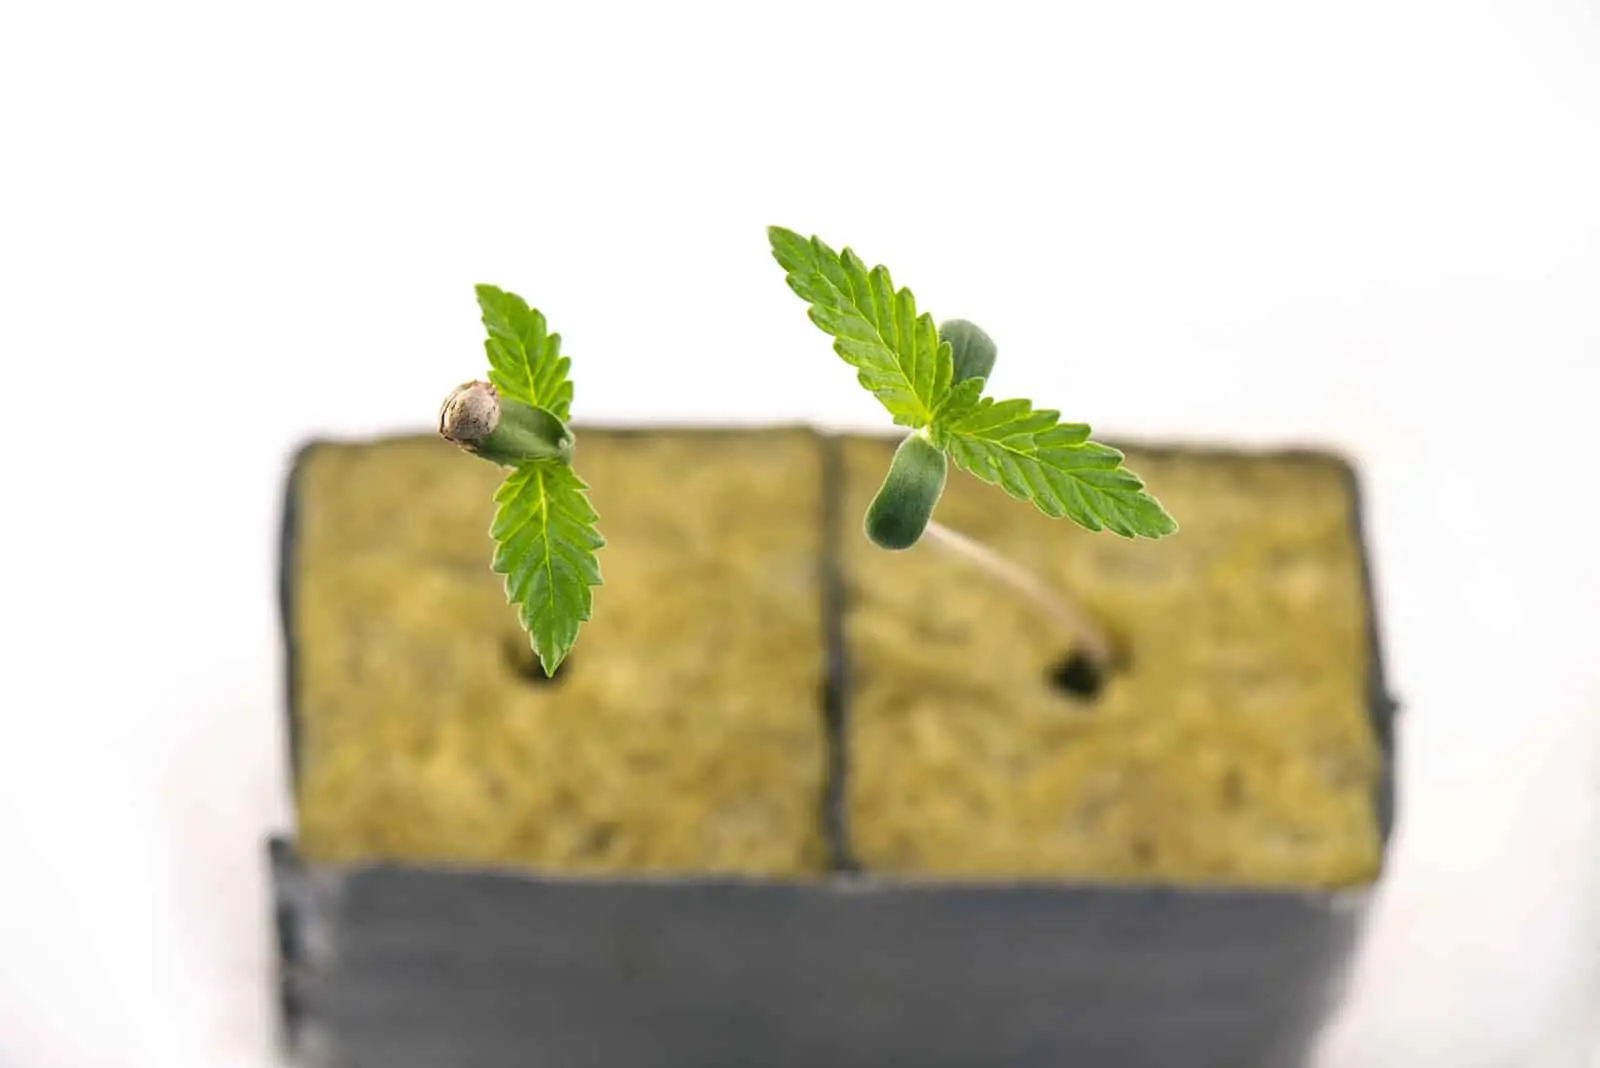 Cannabis Seedling Stage. Marijuana Plant Growth Cycle Stages.